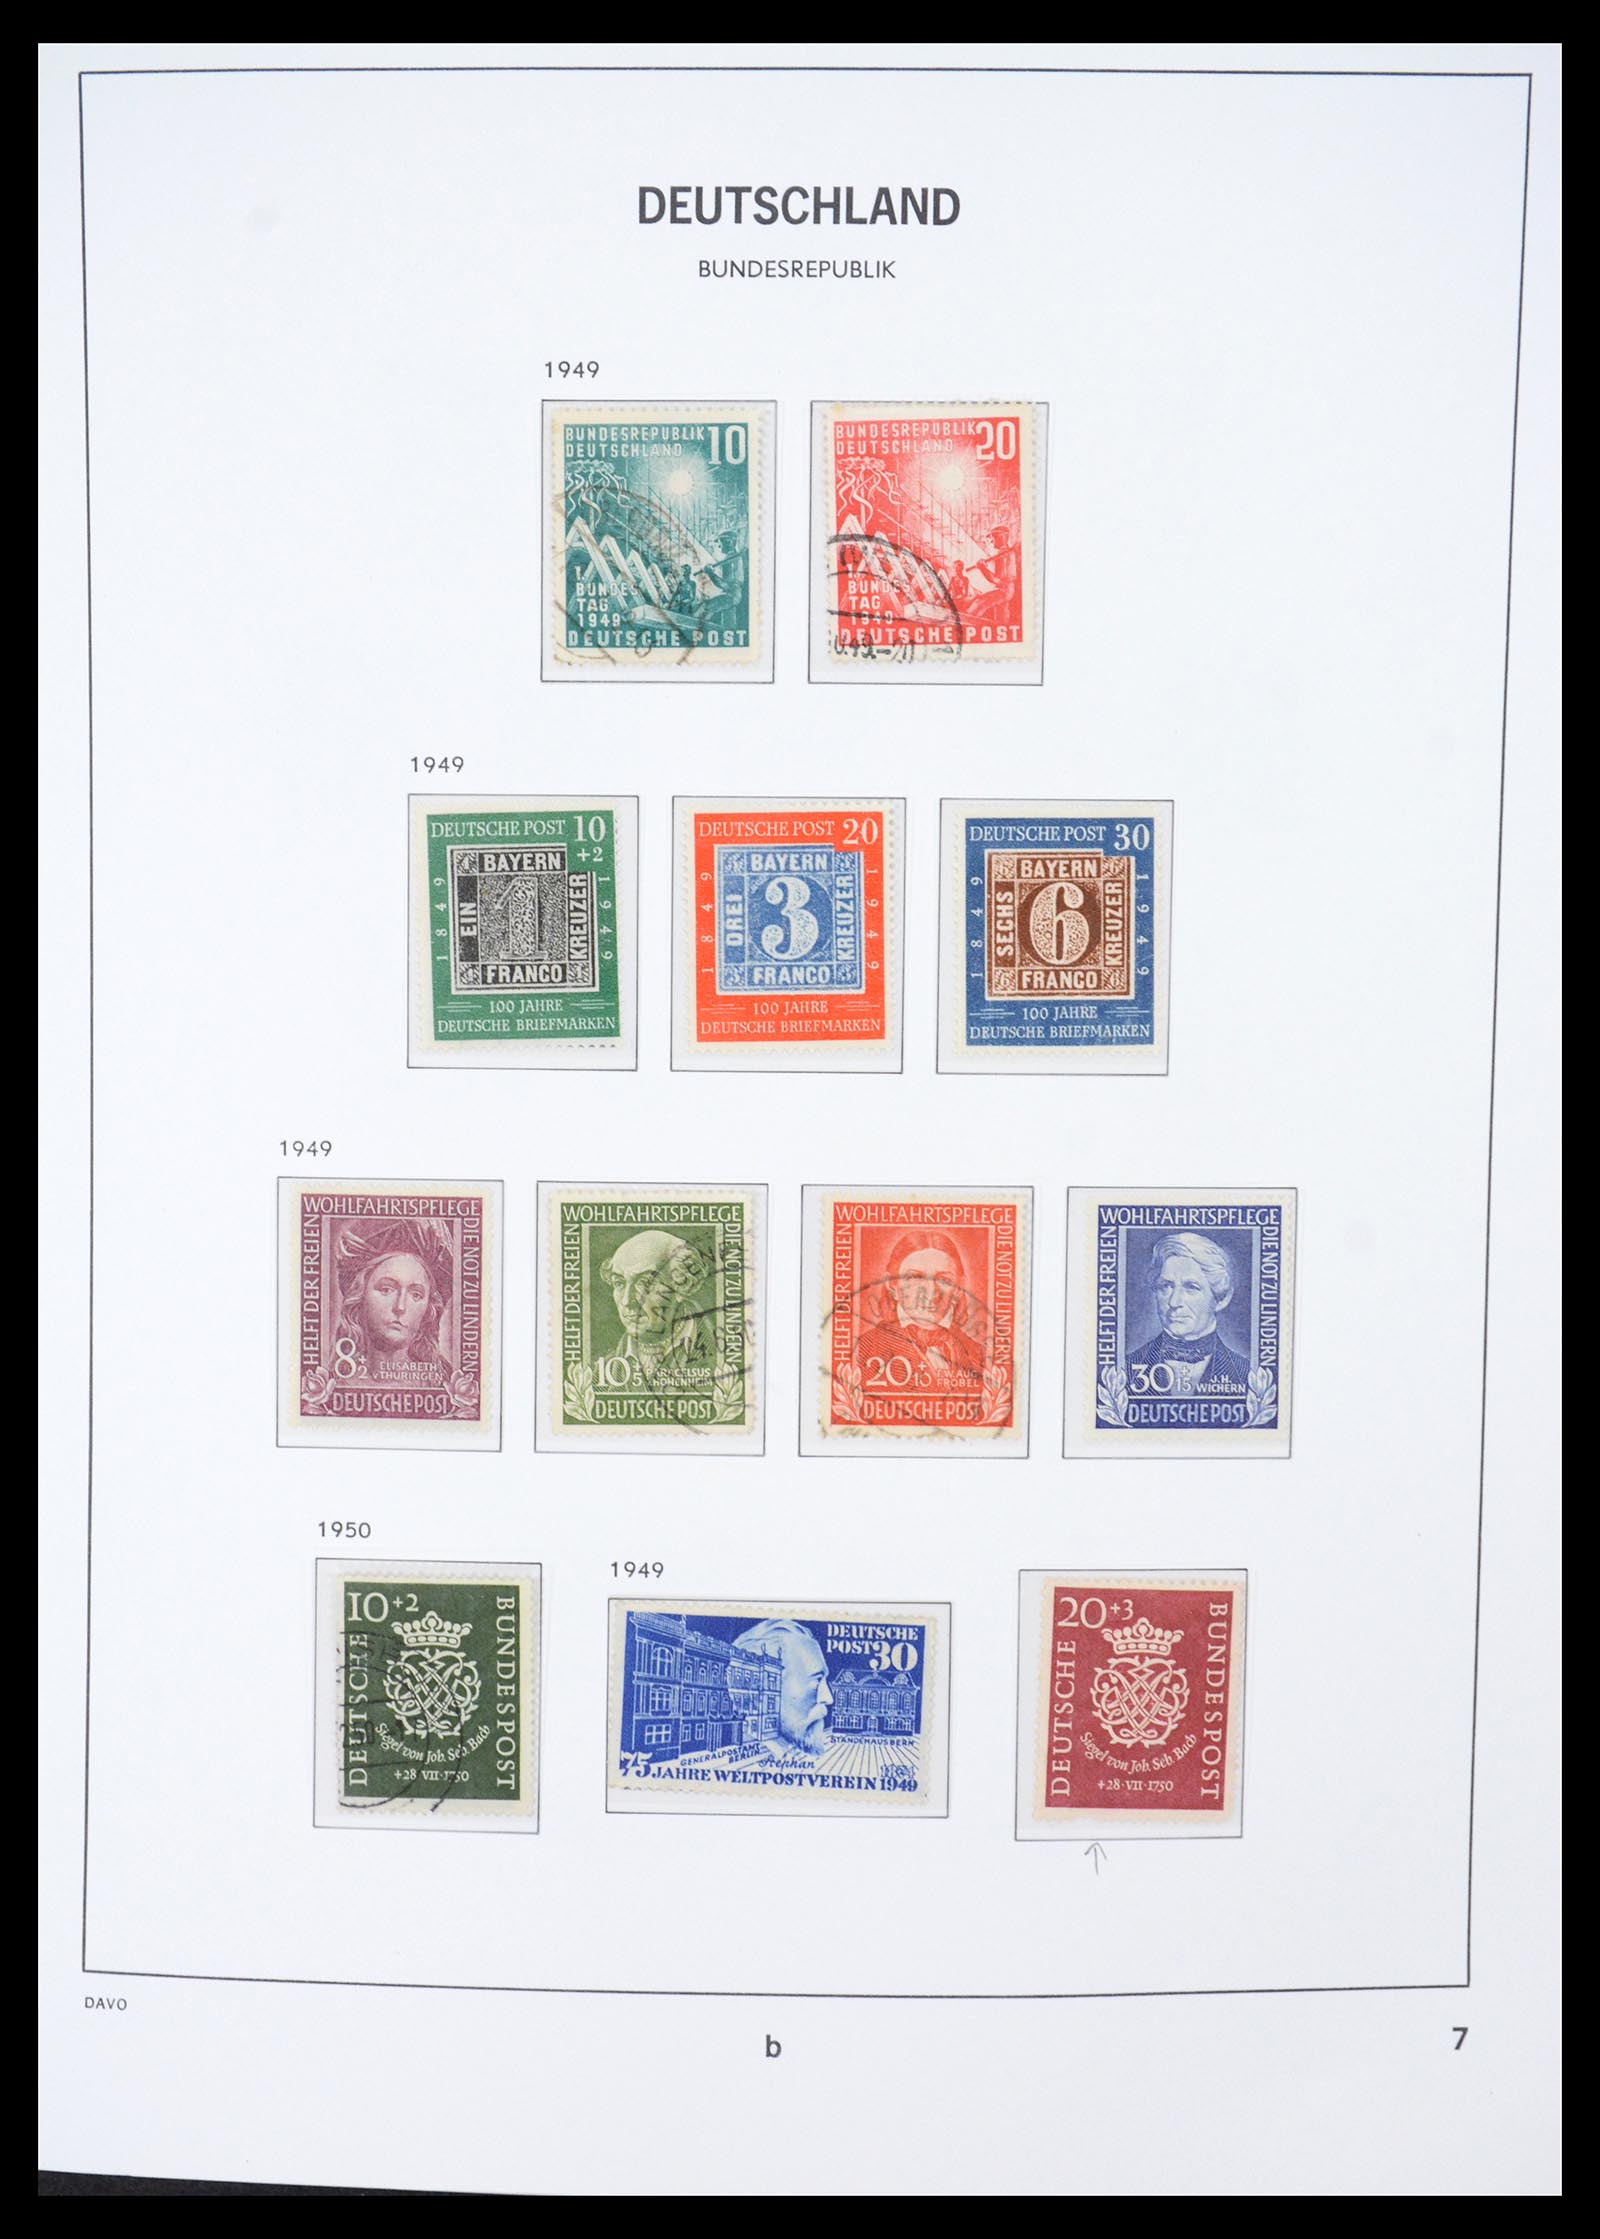 36387 001 - Stamp collection 36387 Bundespost 1949-2007.